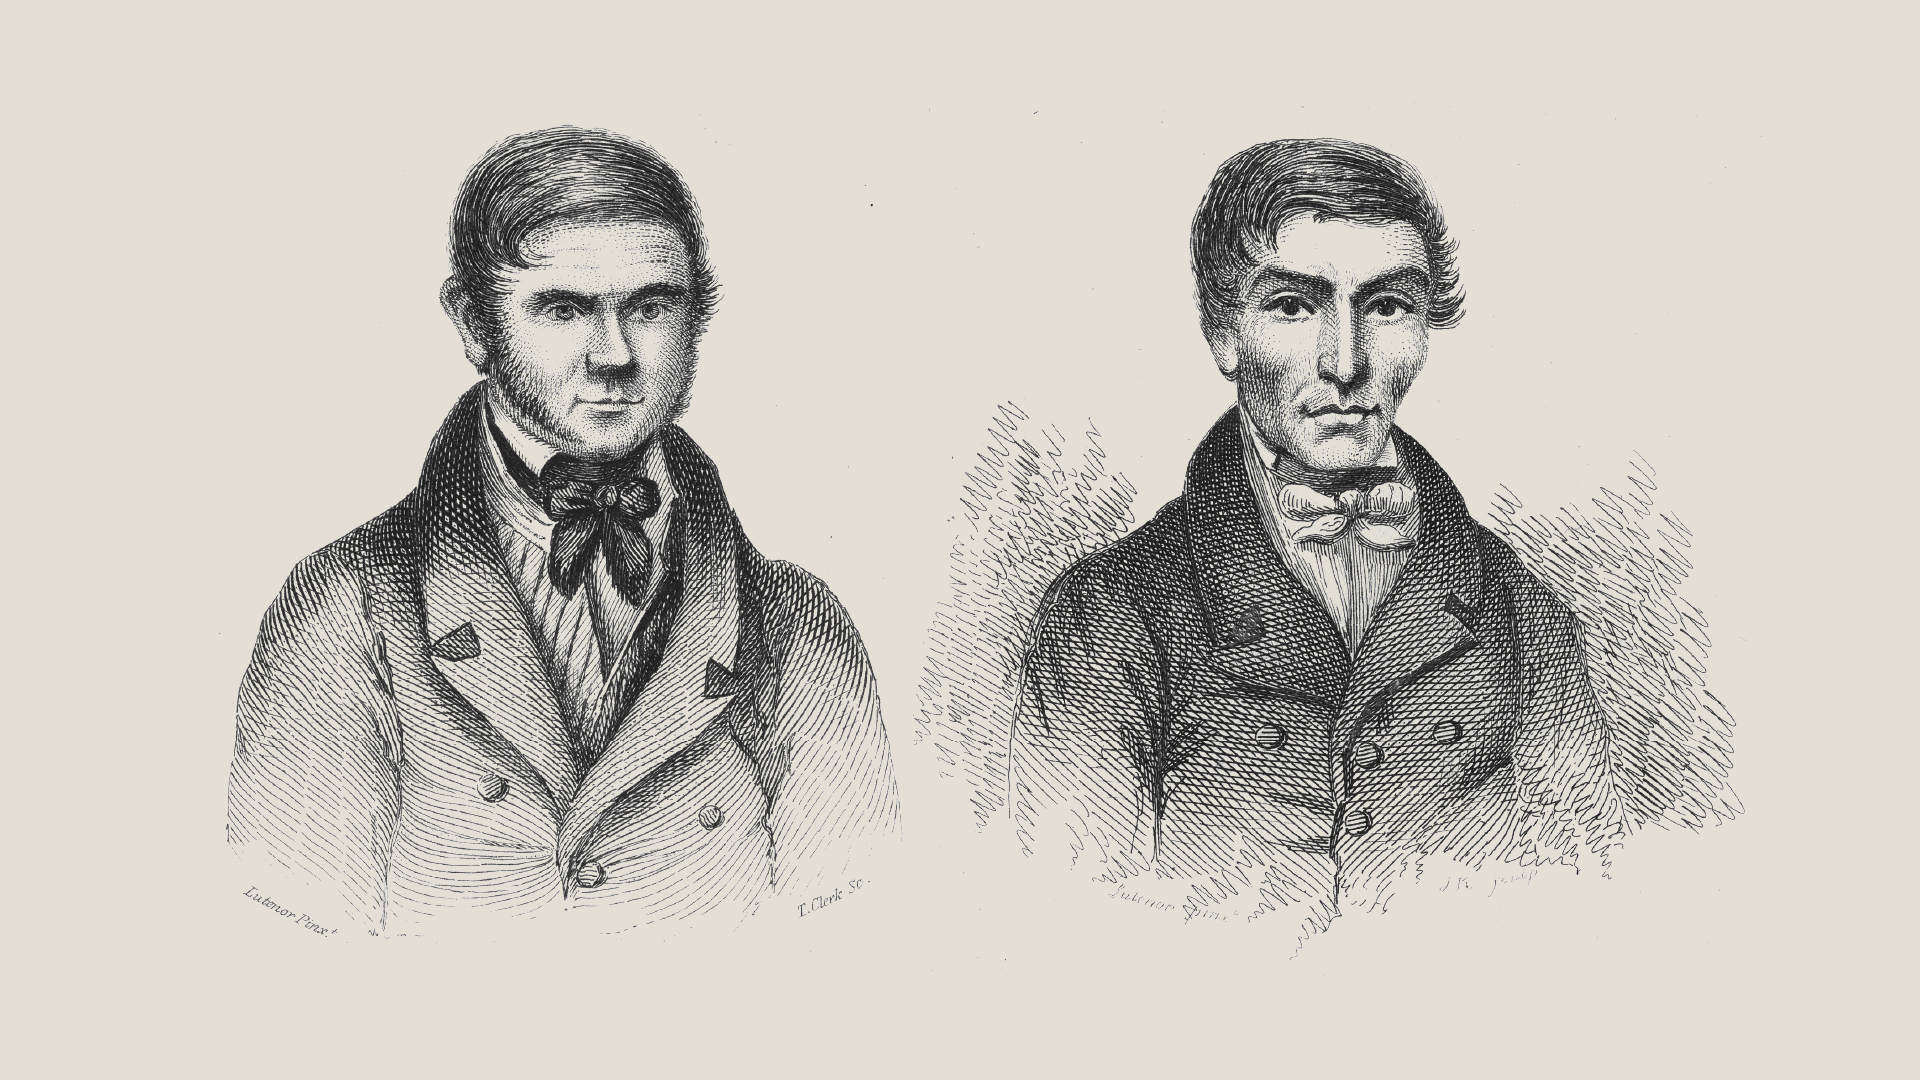 Composite image combining engraved pictures of William Burke and William Hare